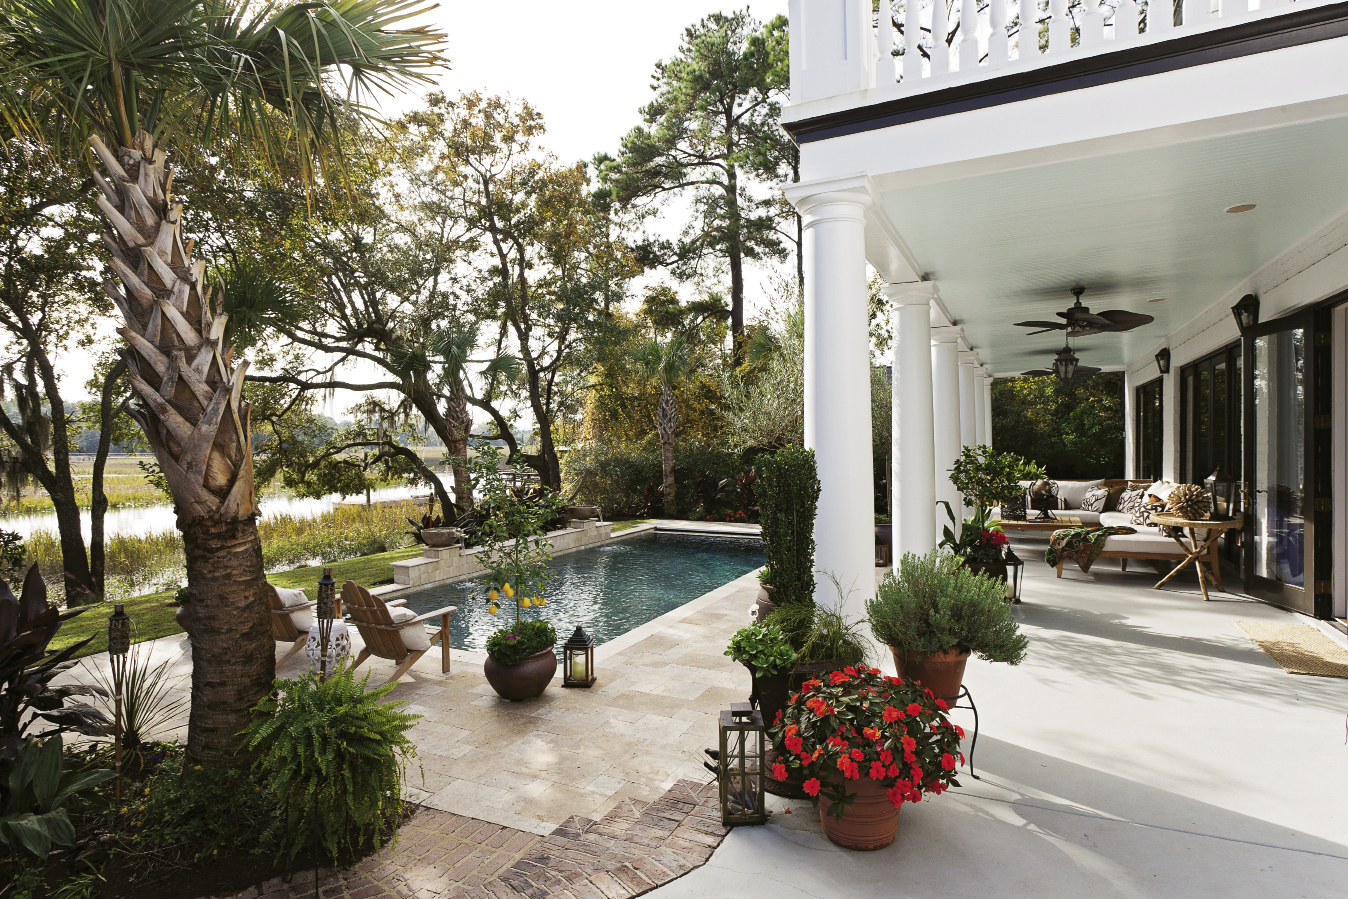 Outdoor Oasis: The Moriarts redesigned the backyard to highlight the view and better accommodate life outdoors.